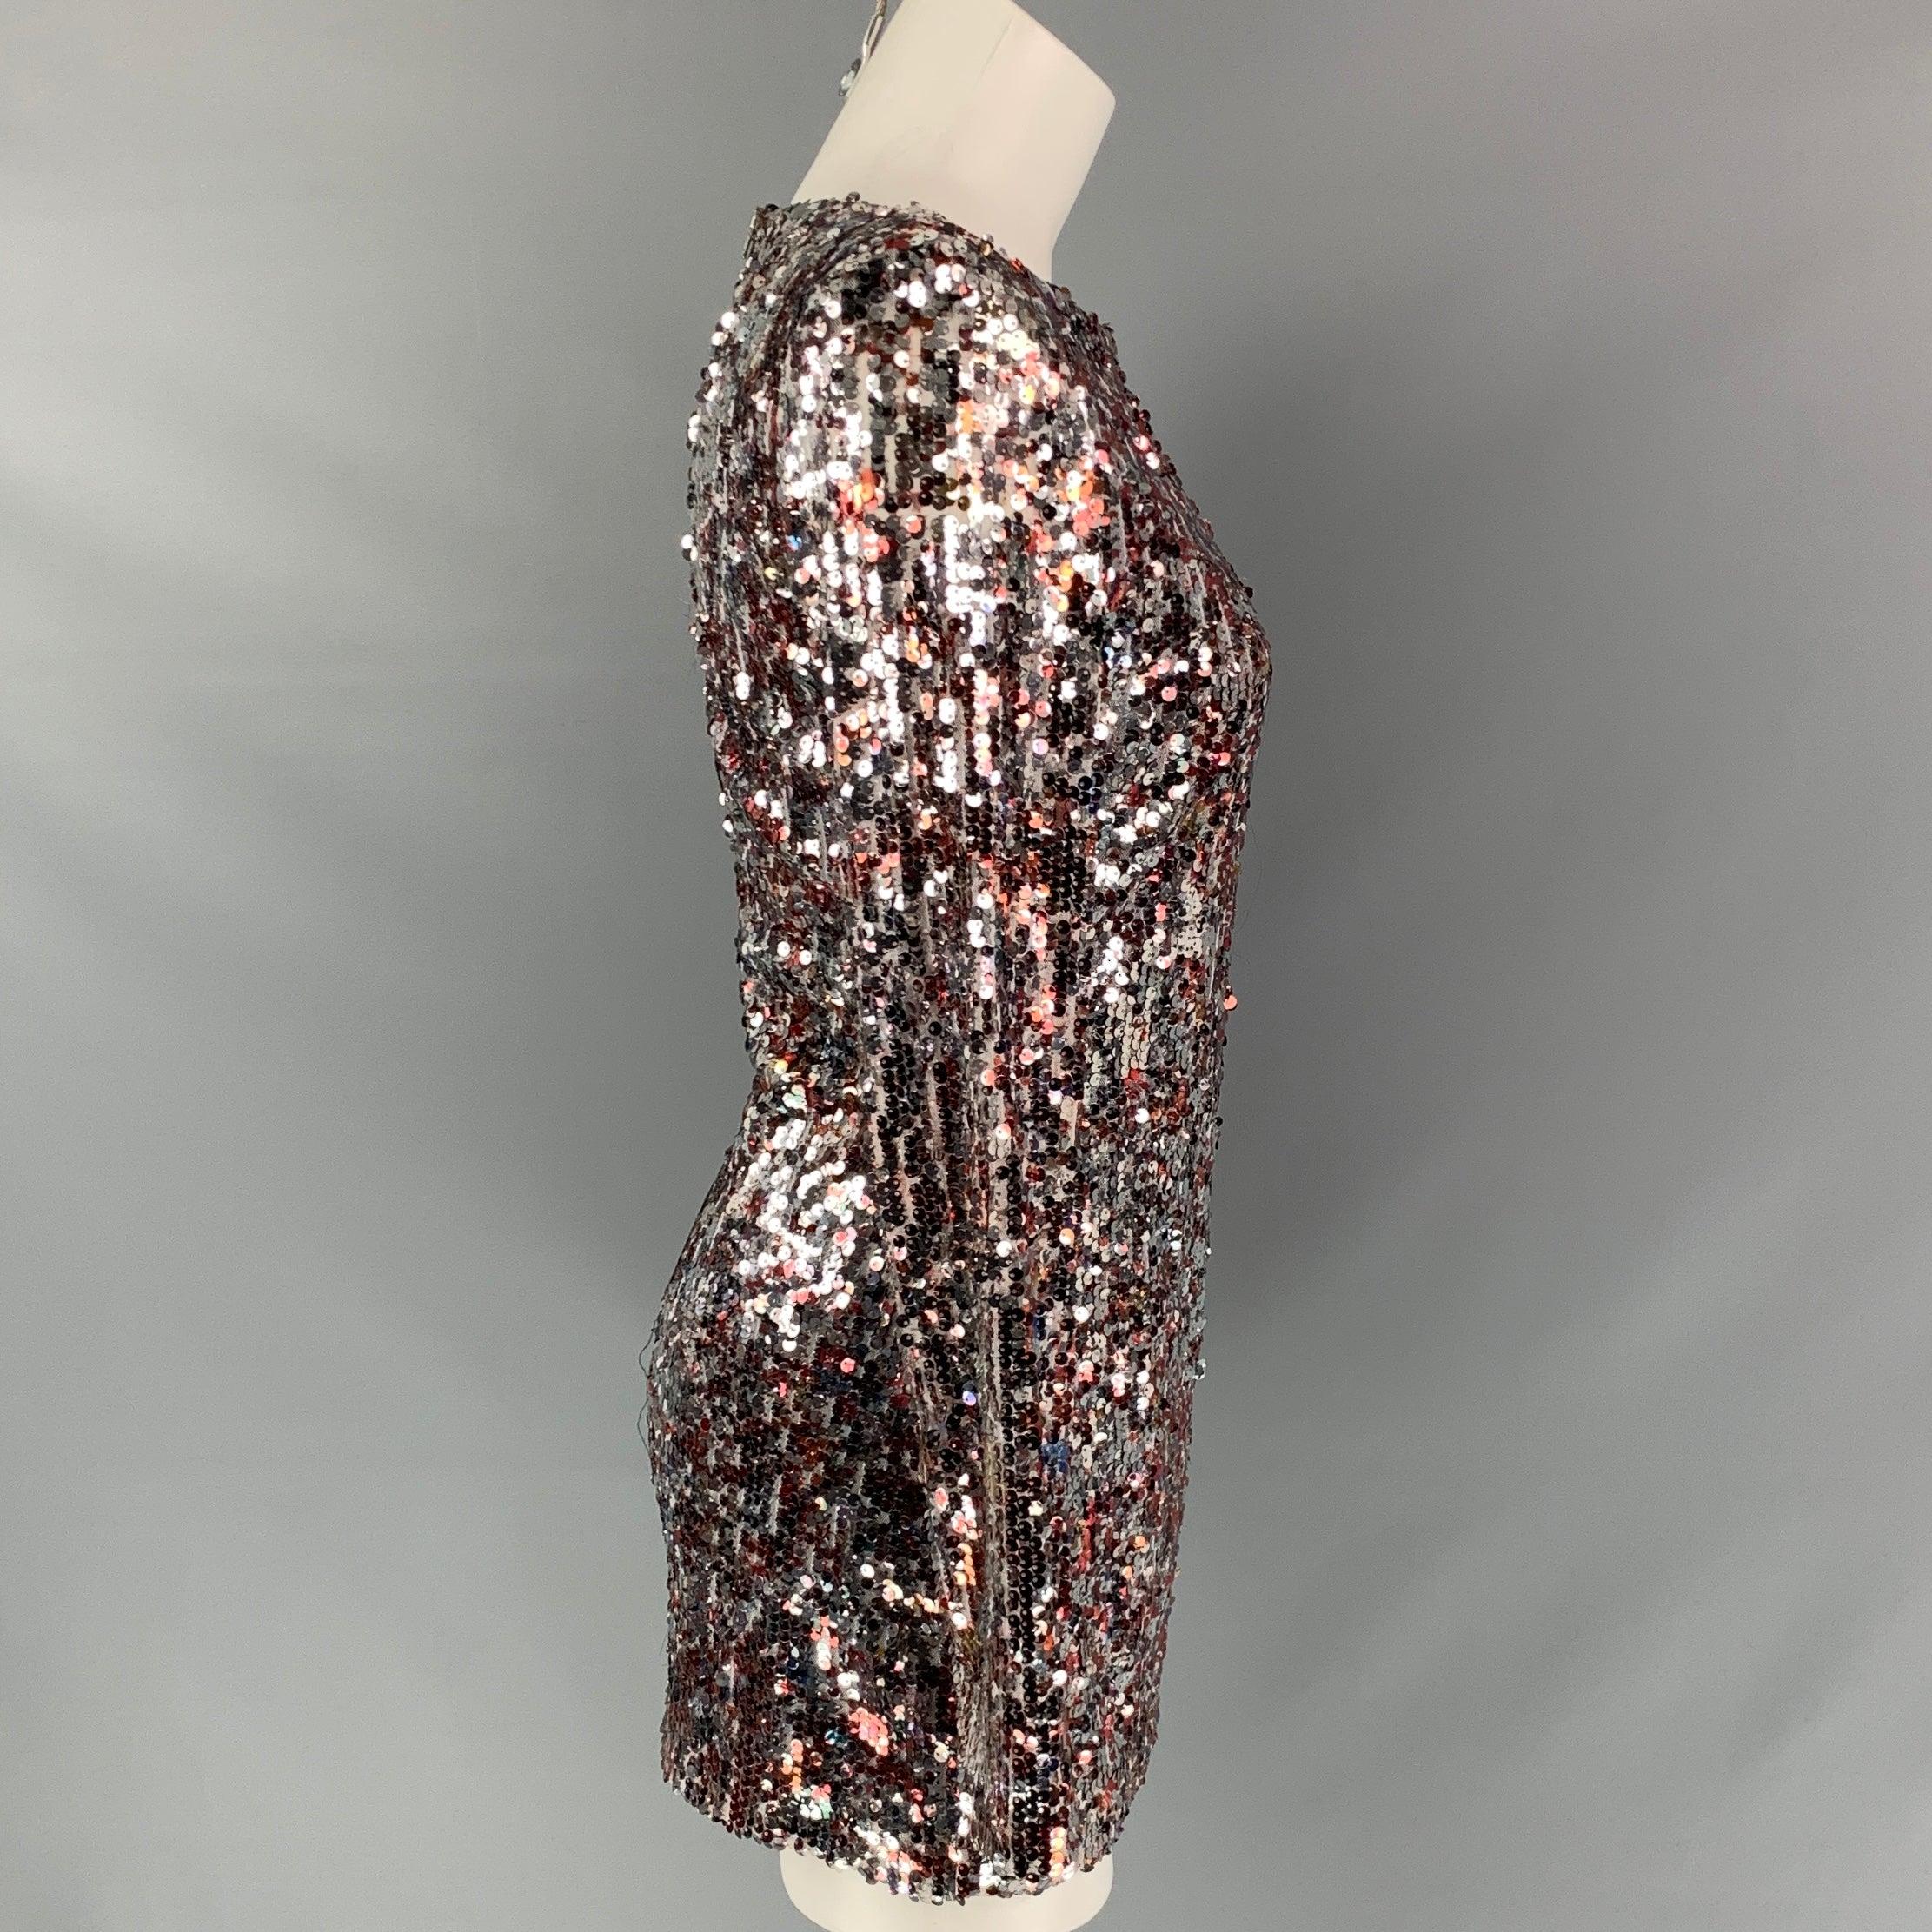 BADGLEY MISCHKA by Mark and James Size M Silver & Burgundy Sequined Mini Dress In Good Condition For Sale In San Francisco, CA